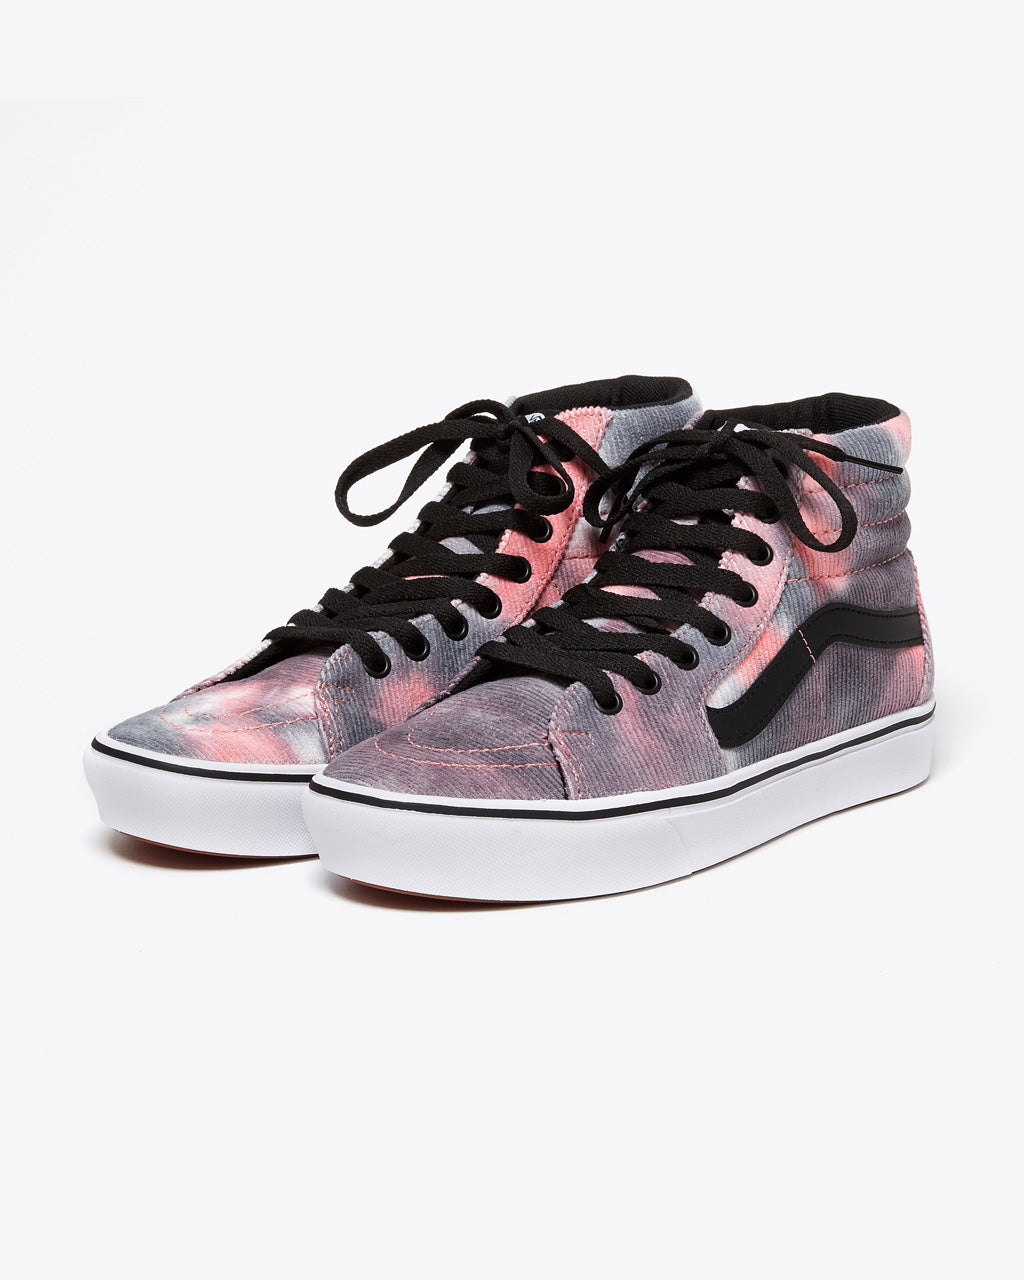 pink and white vans high top